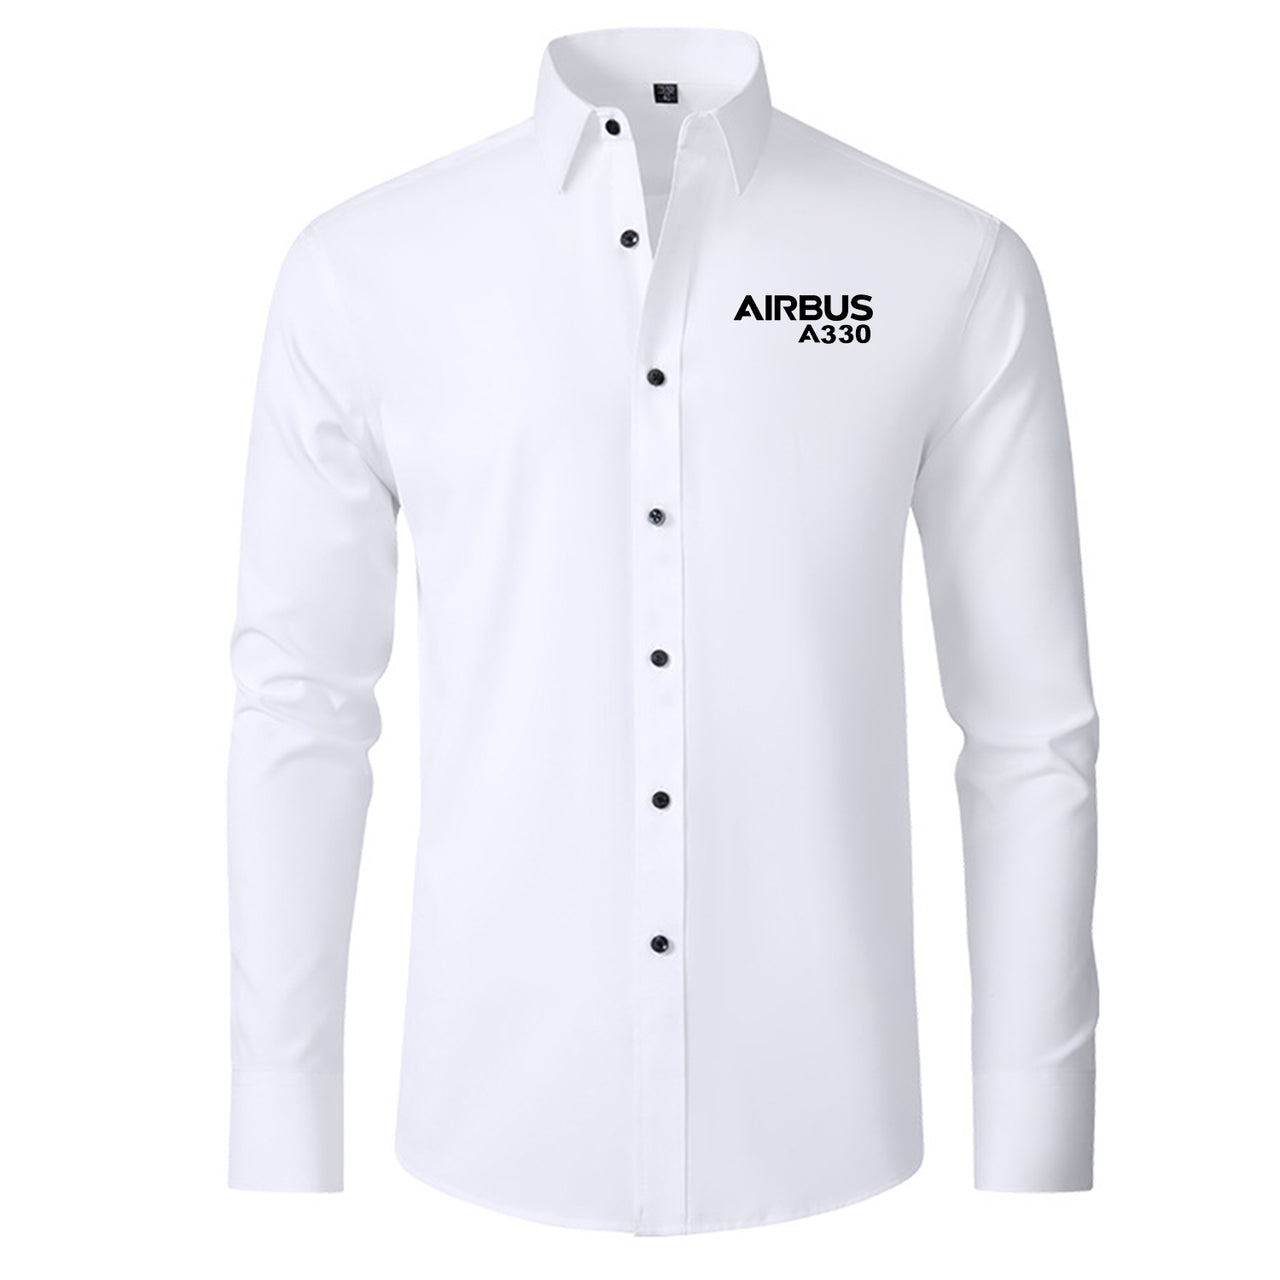 Airbus A330 & Text Designed Long Sleeve Shirts